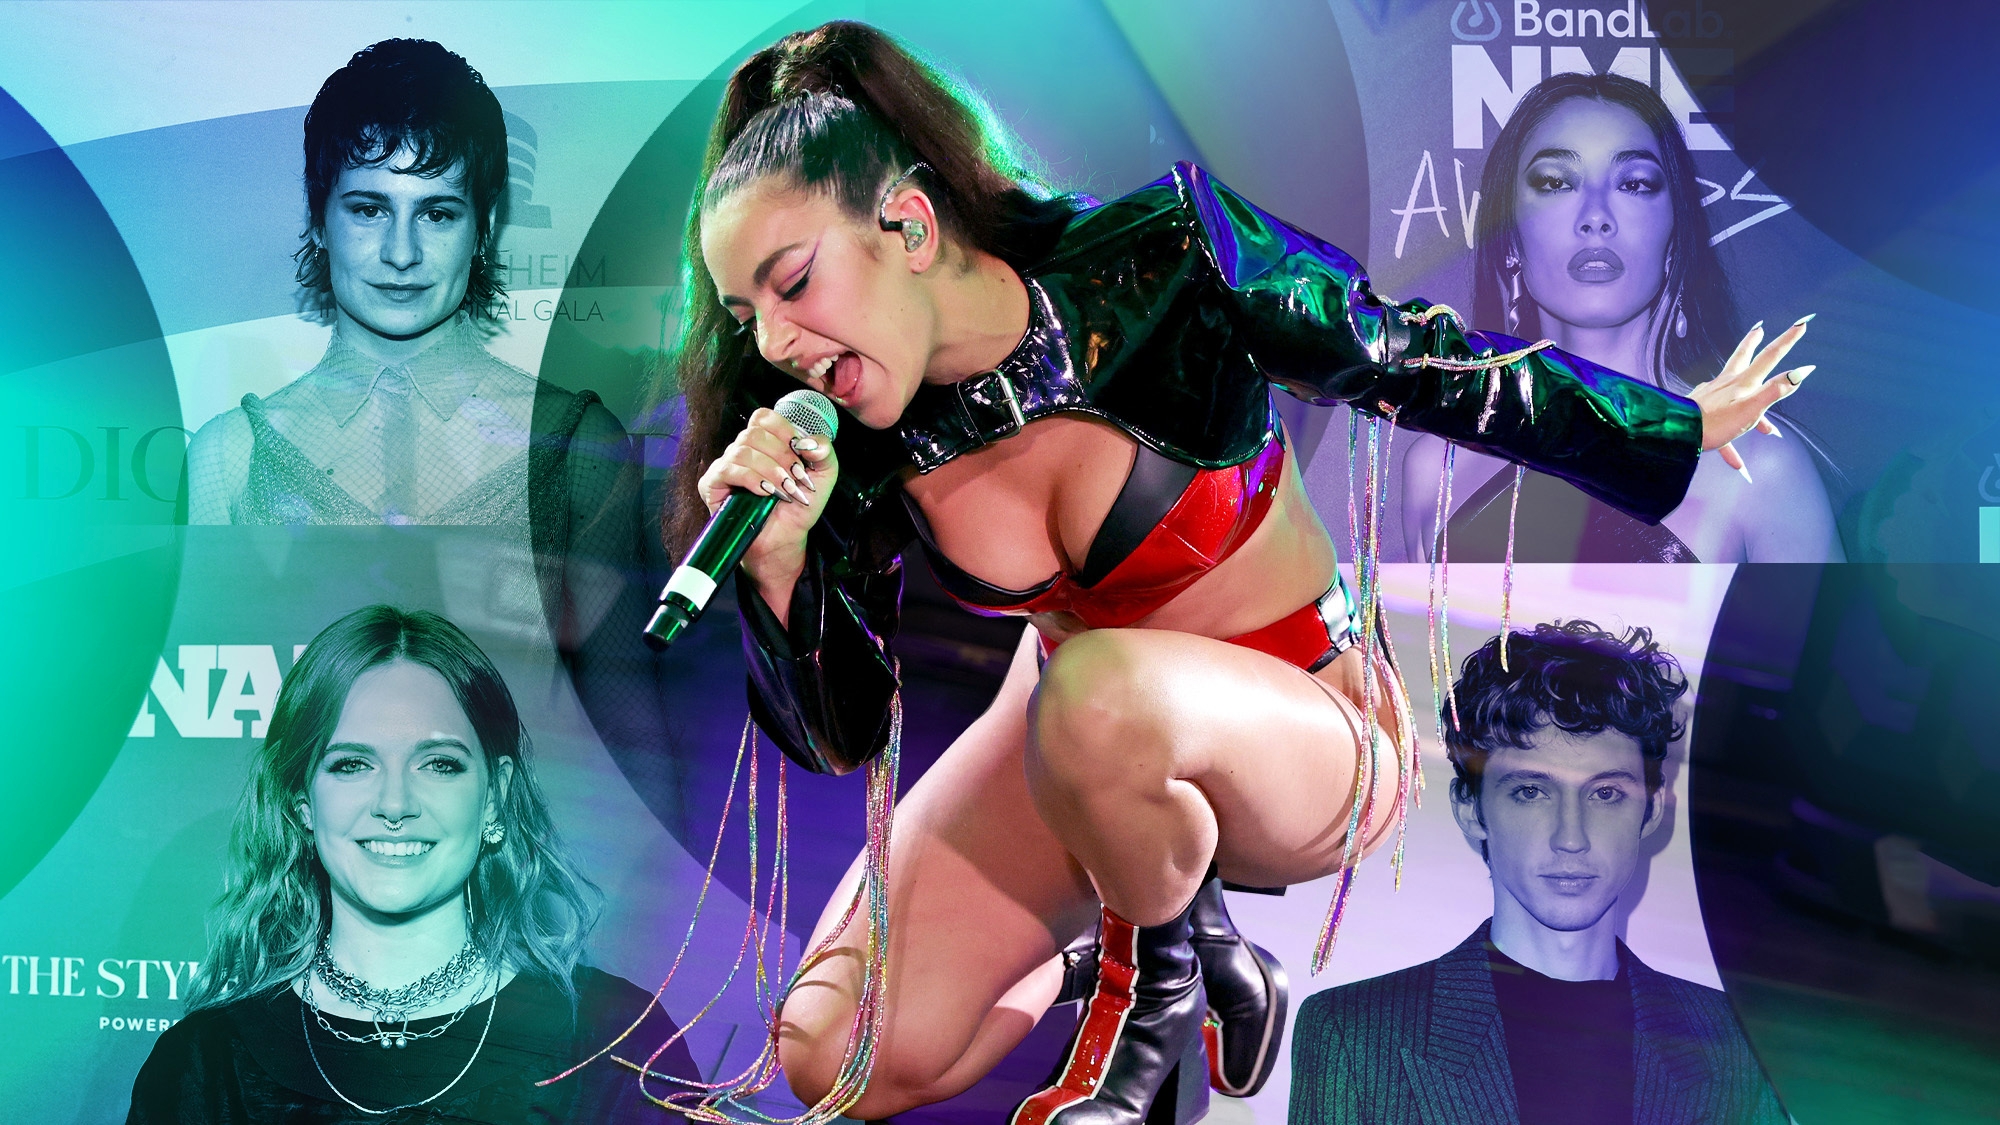 A definitive ranking of Charli XCX’s collaborations, from worst to best